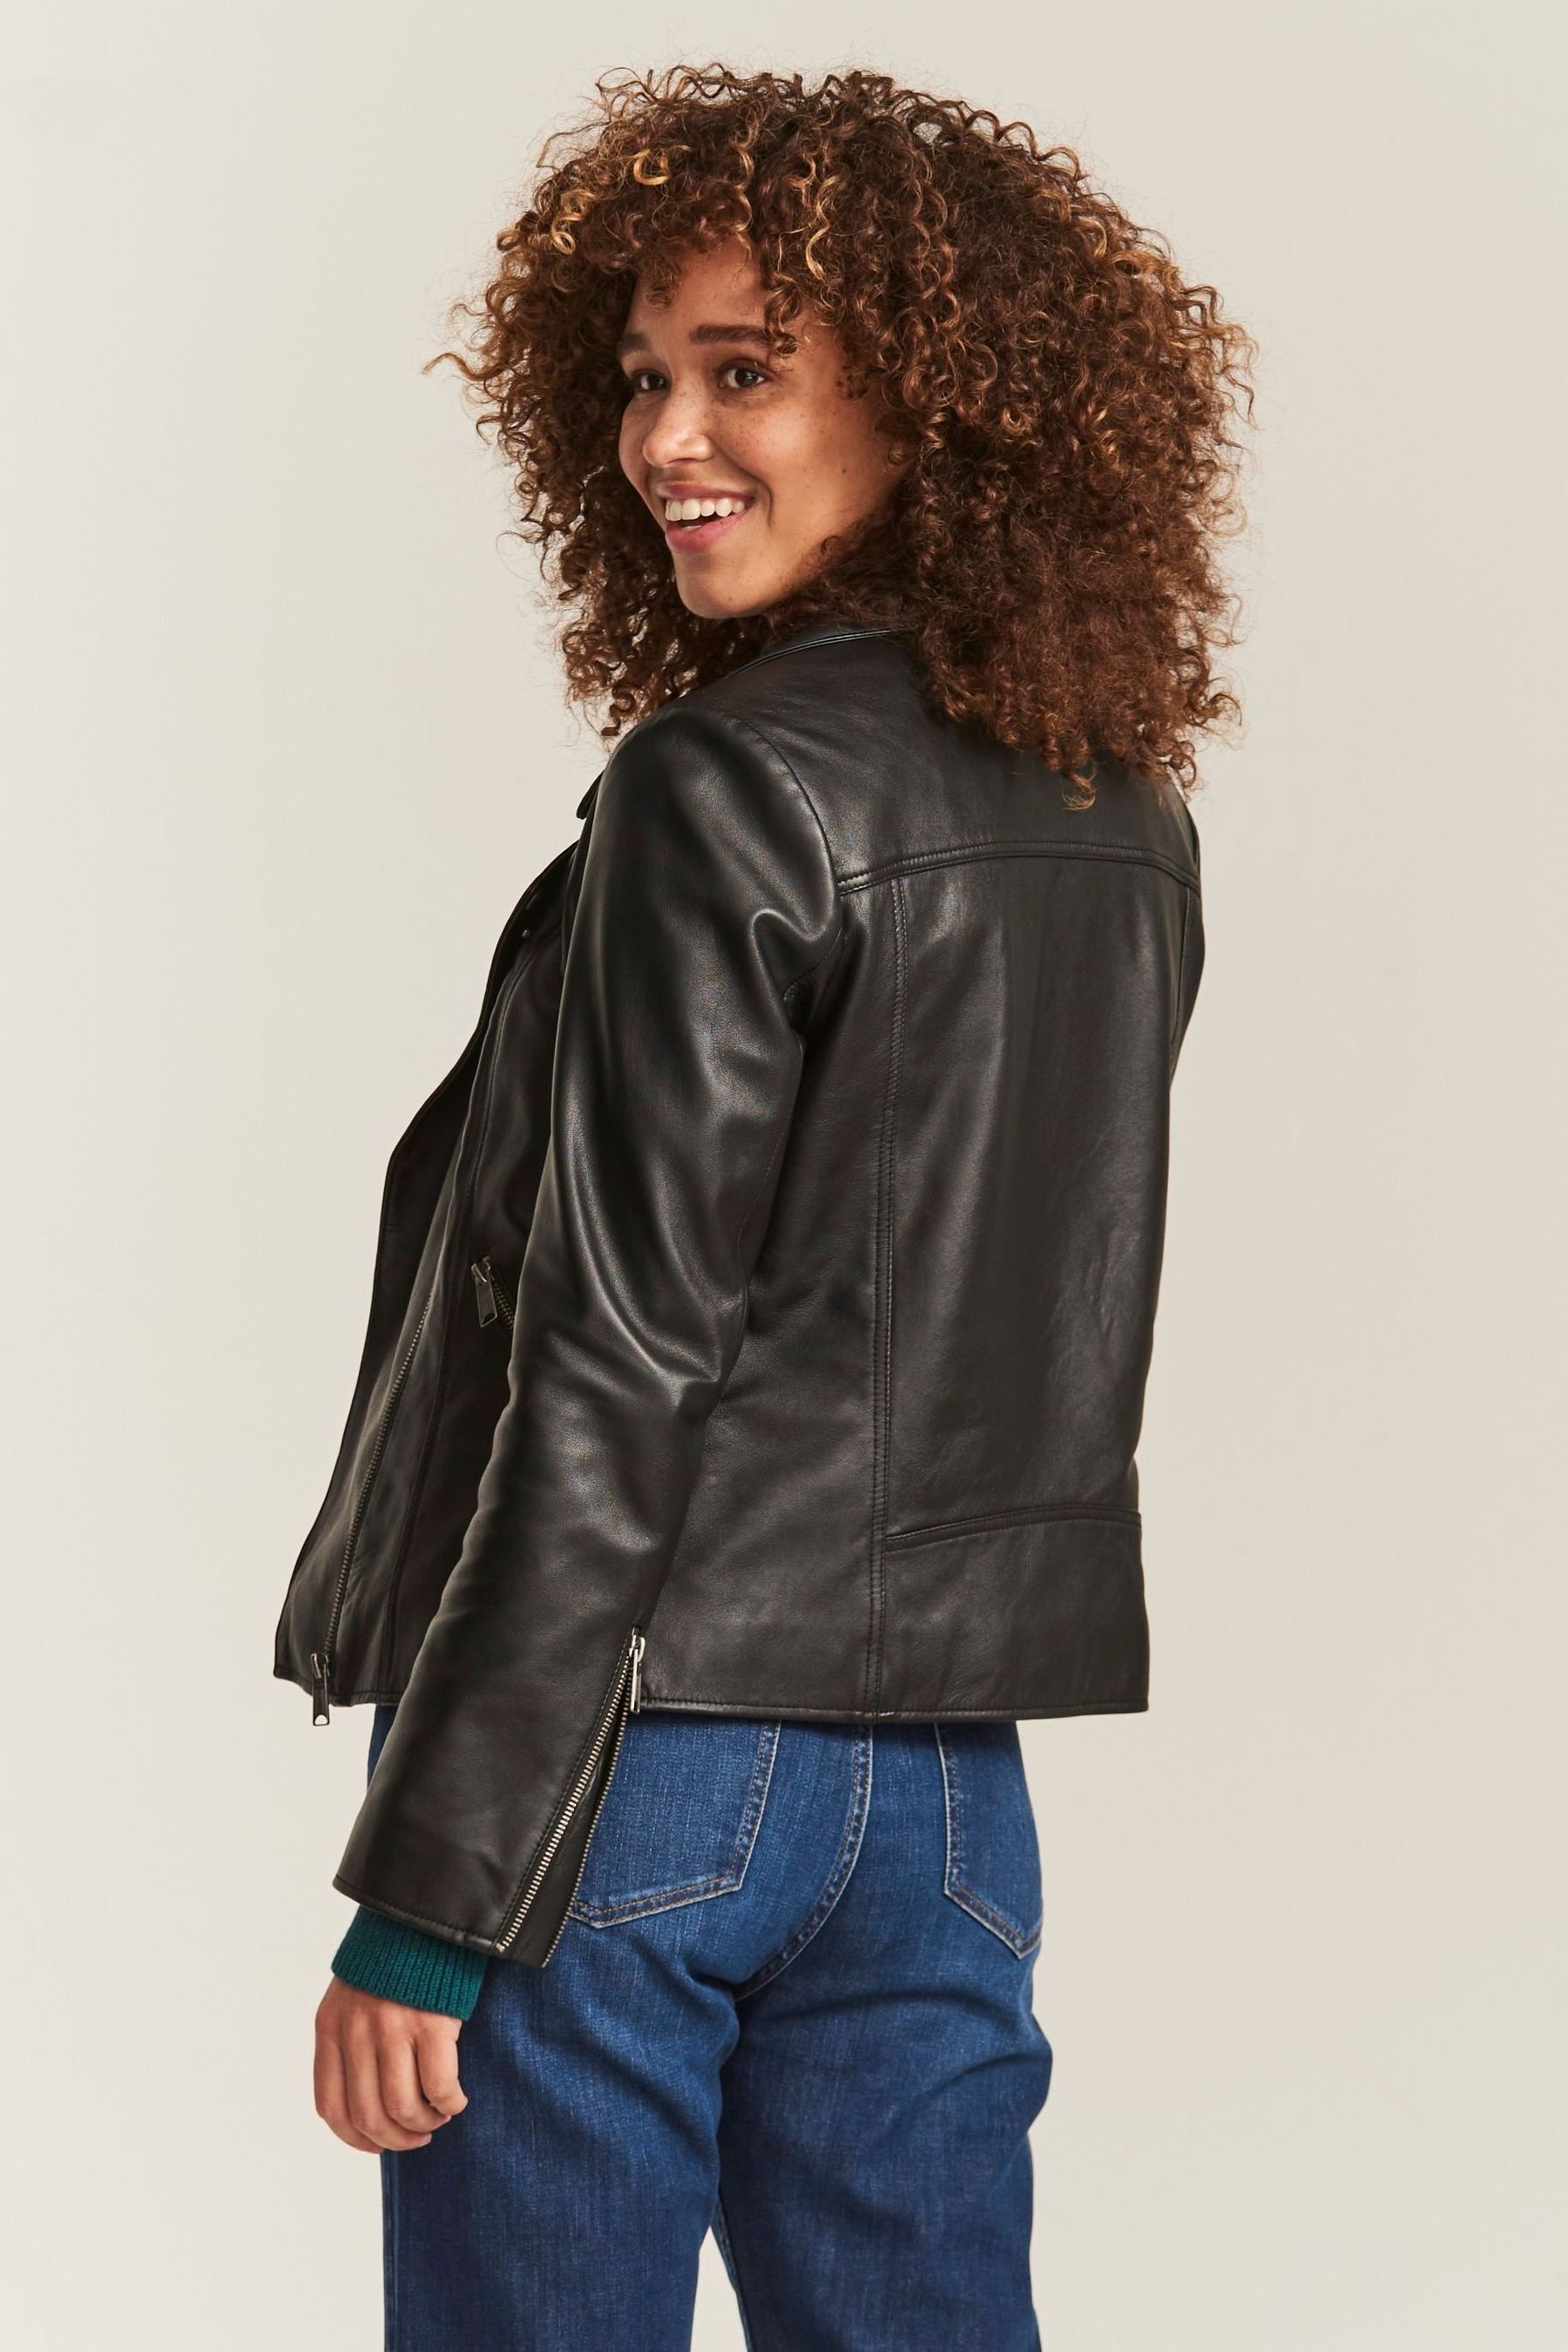 Buy FatFace Black Biker Bethany Jacket from the Next UK online shop